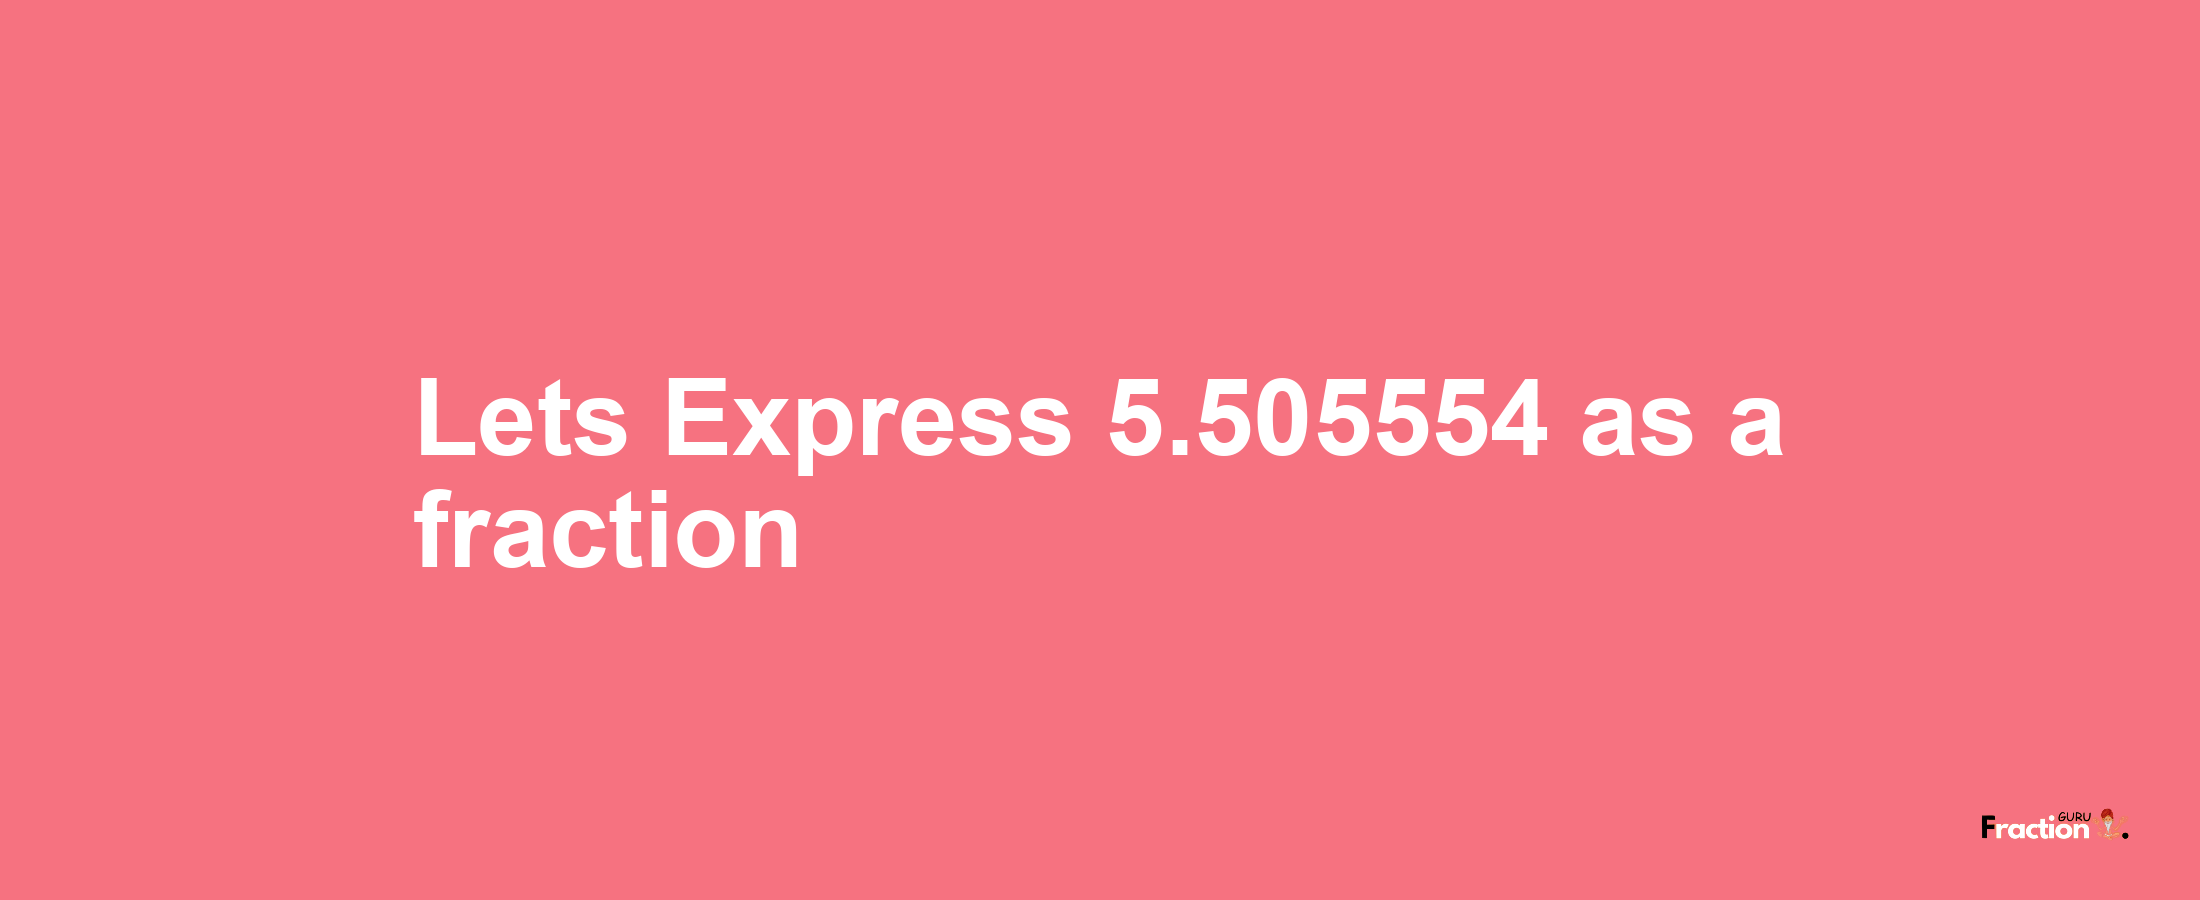 Lets Express 5.505554 as afraction